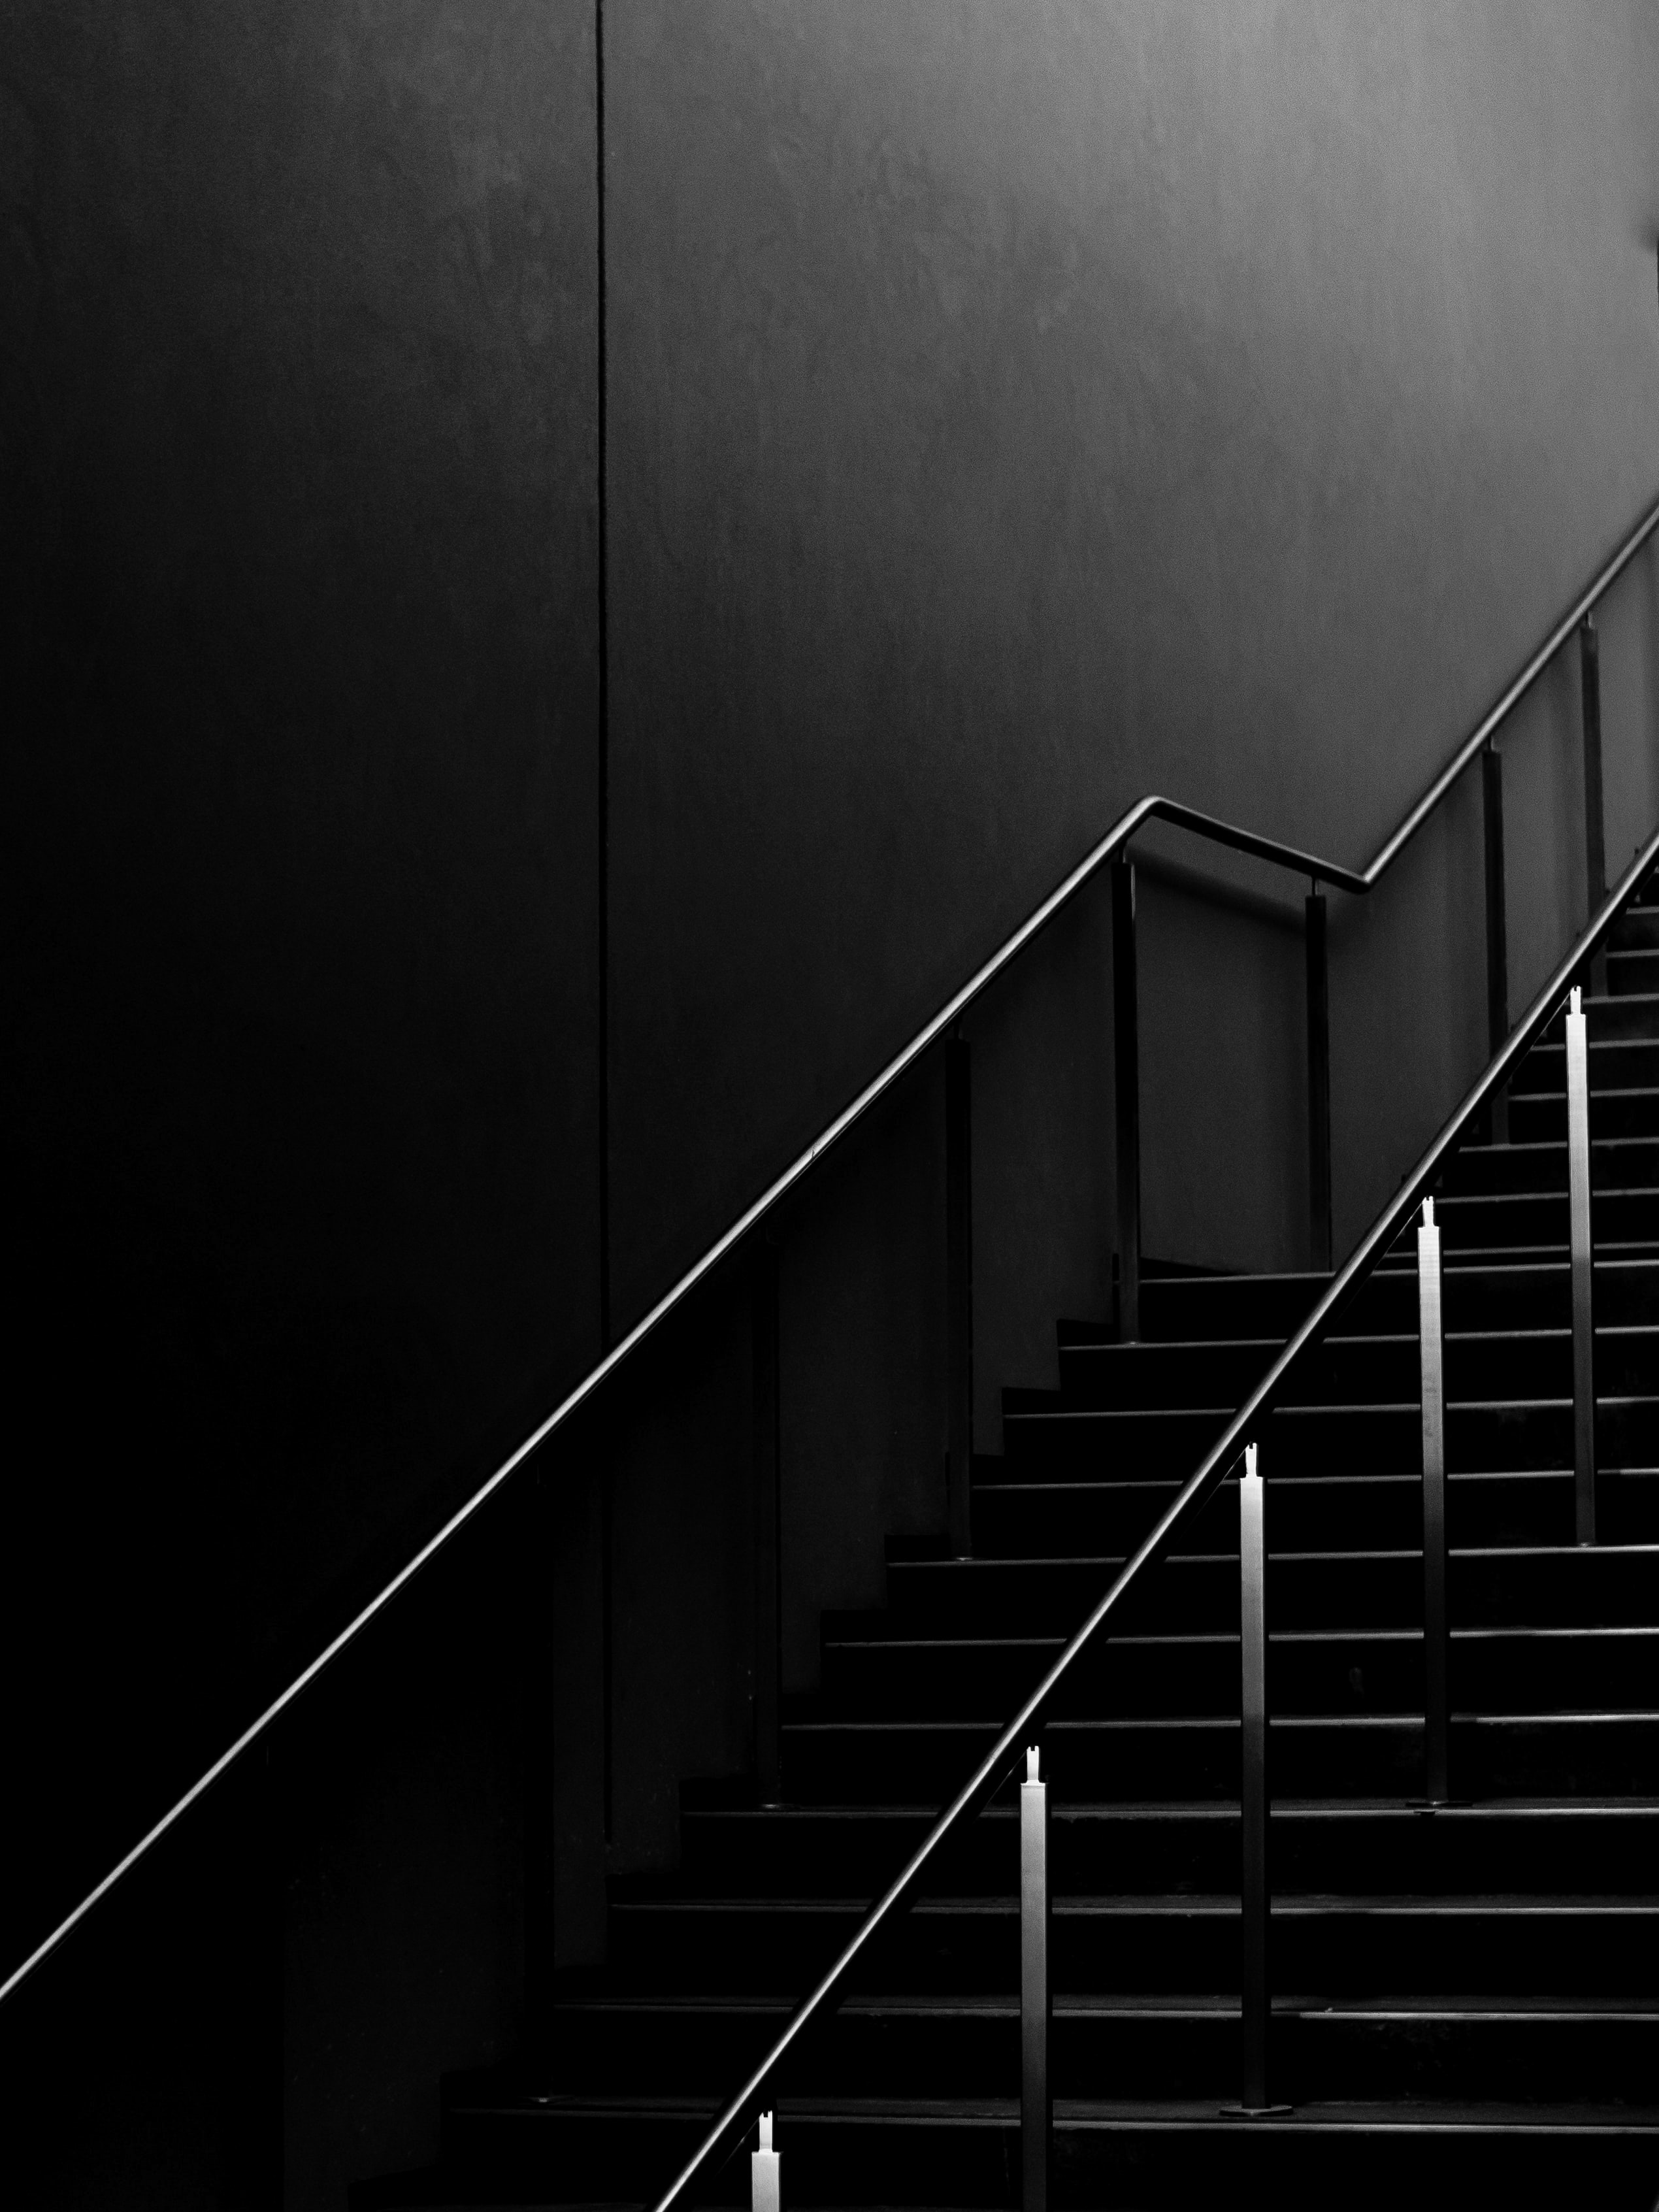 59466 Screensavers and Wallpapers Stairs for phone. Download dark, black, minimalism, stairs, ladder, railings, handrail pictures for free